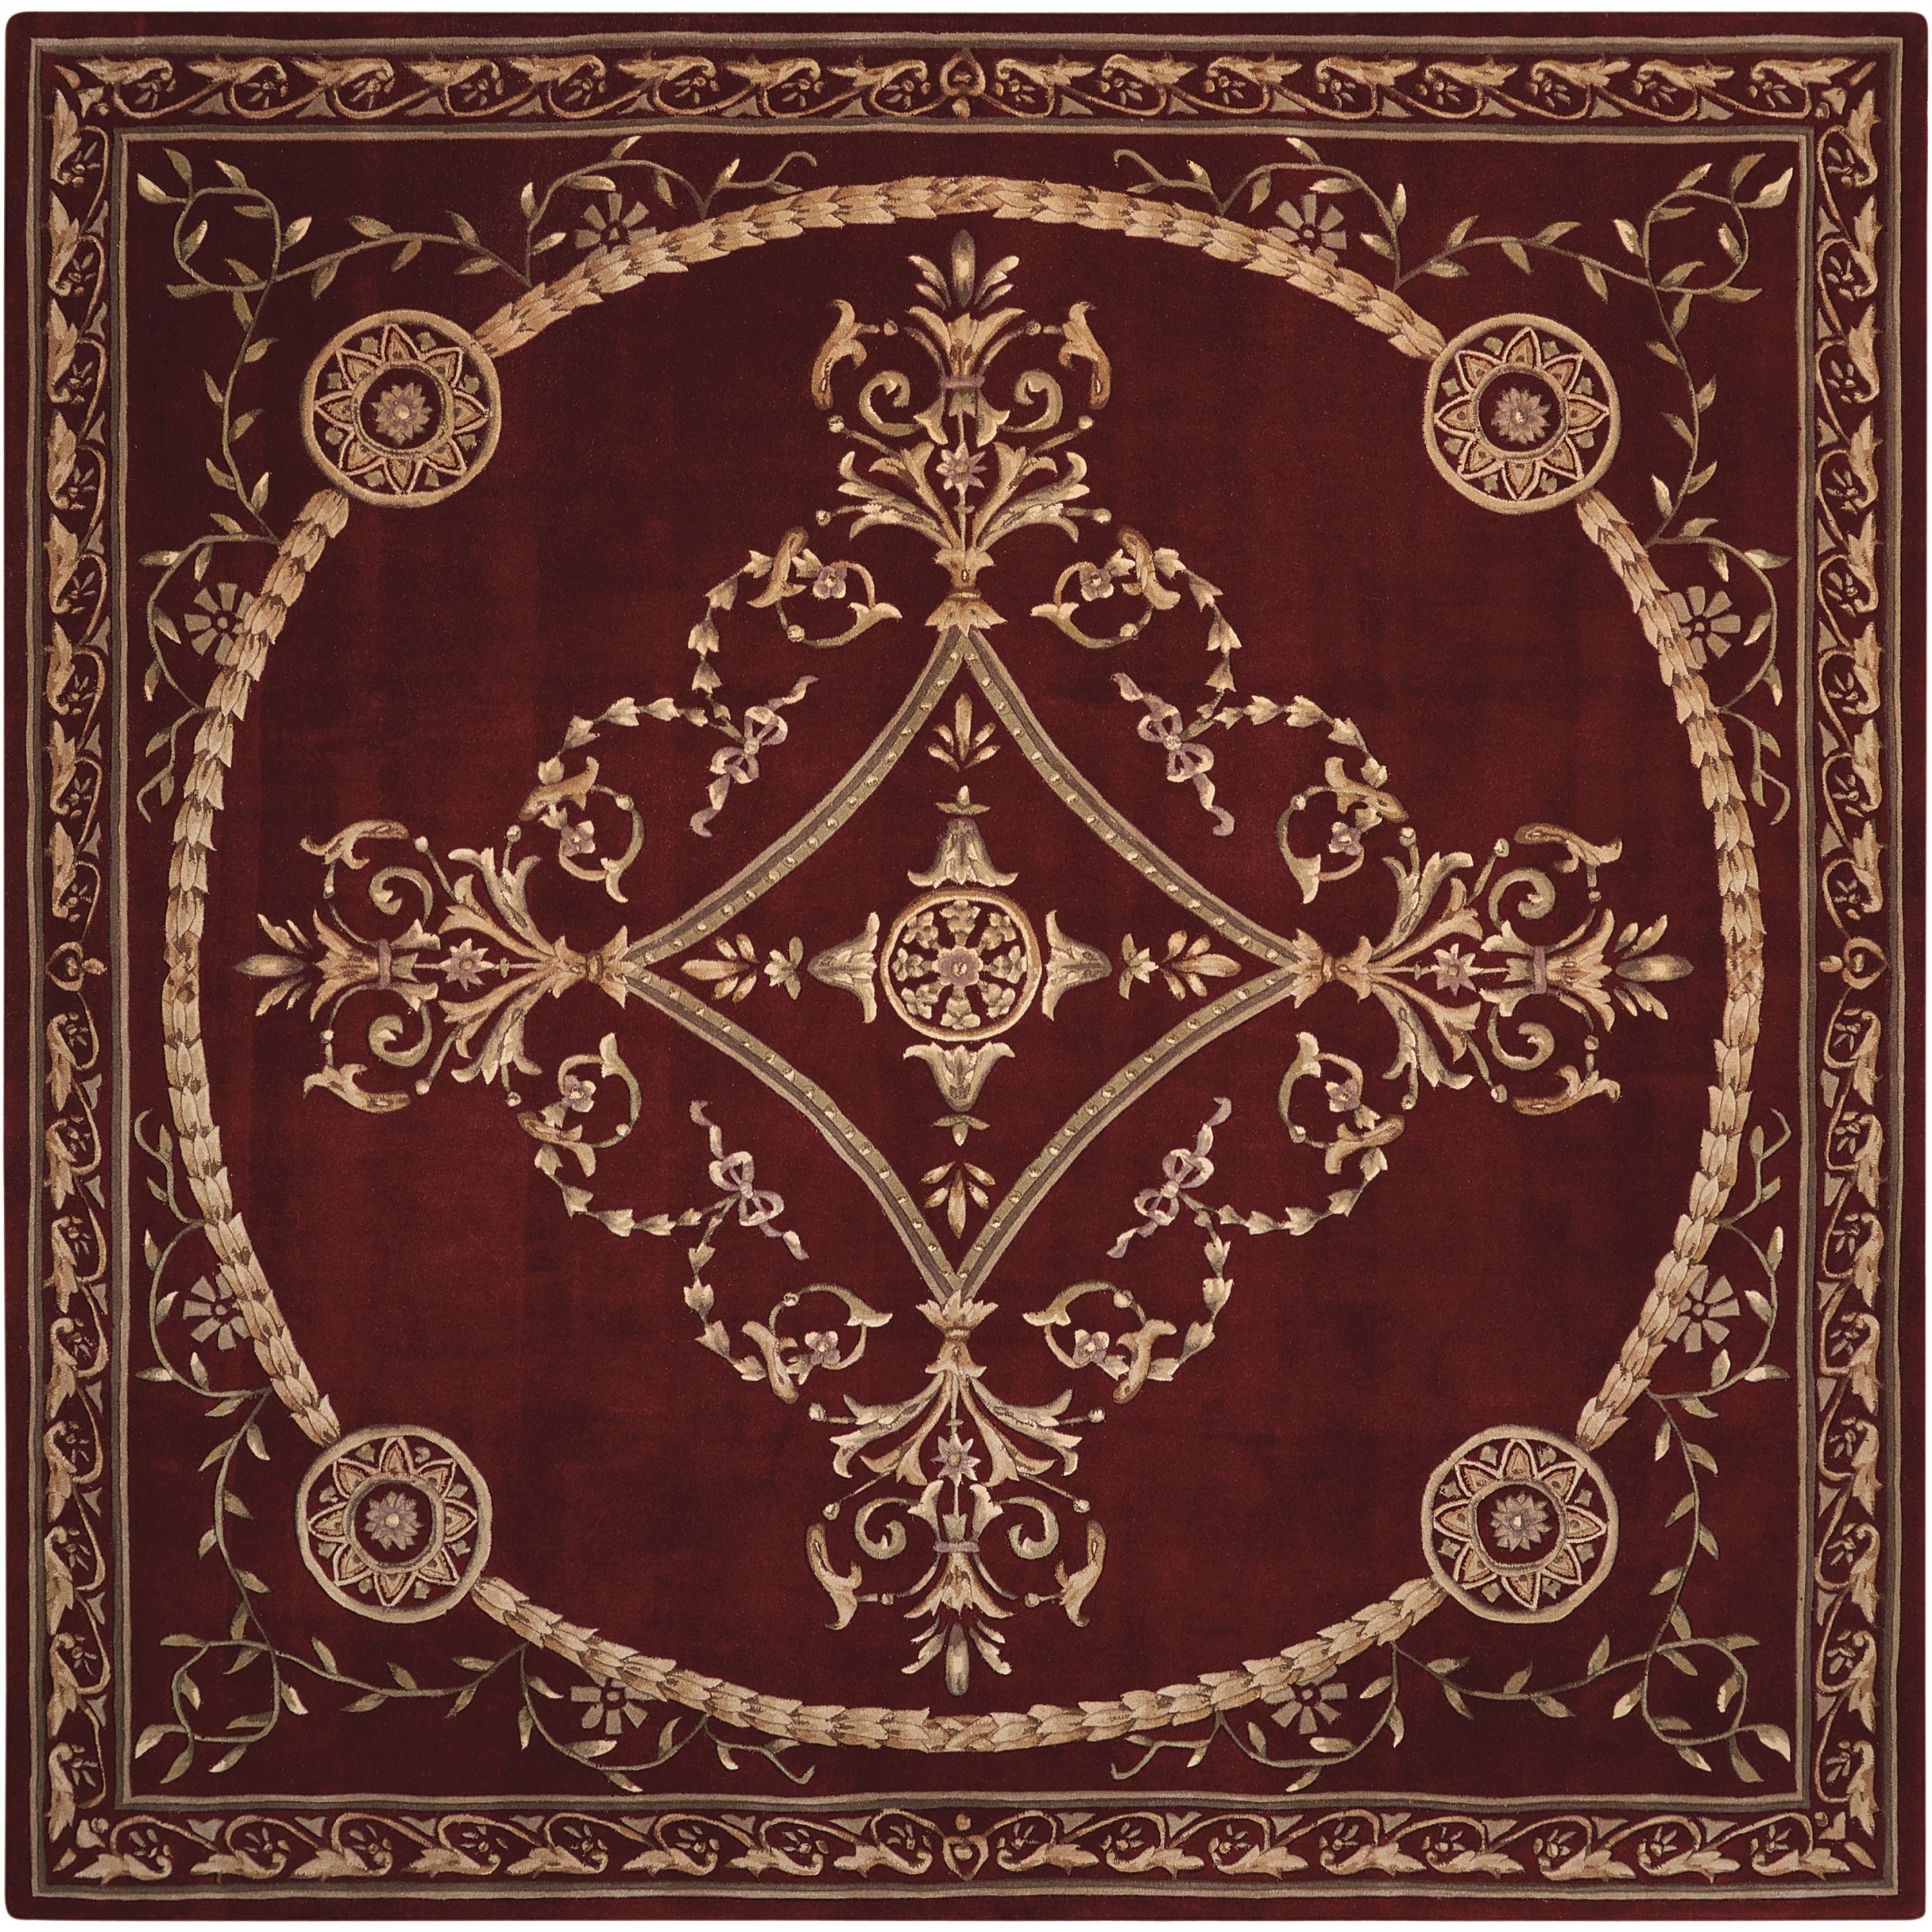 5'3 x 8'3 VP07 Brick Rectangle Area Rug Nourison Versailles Palace 5-Feet 3-Inches by 8-Feet 3-Inches